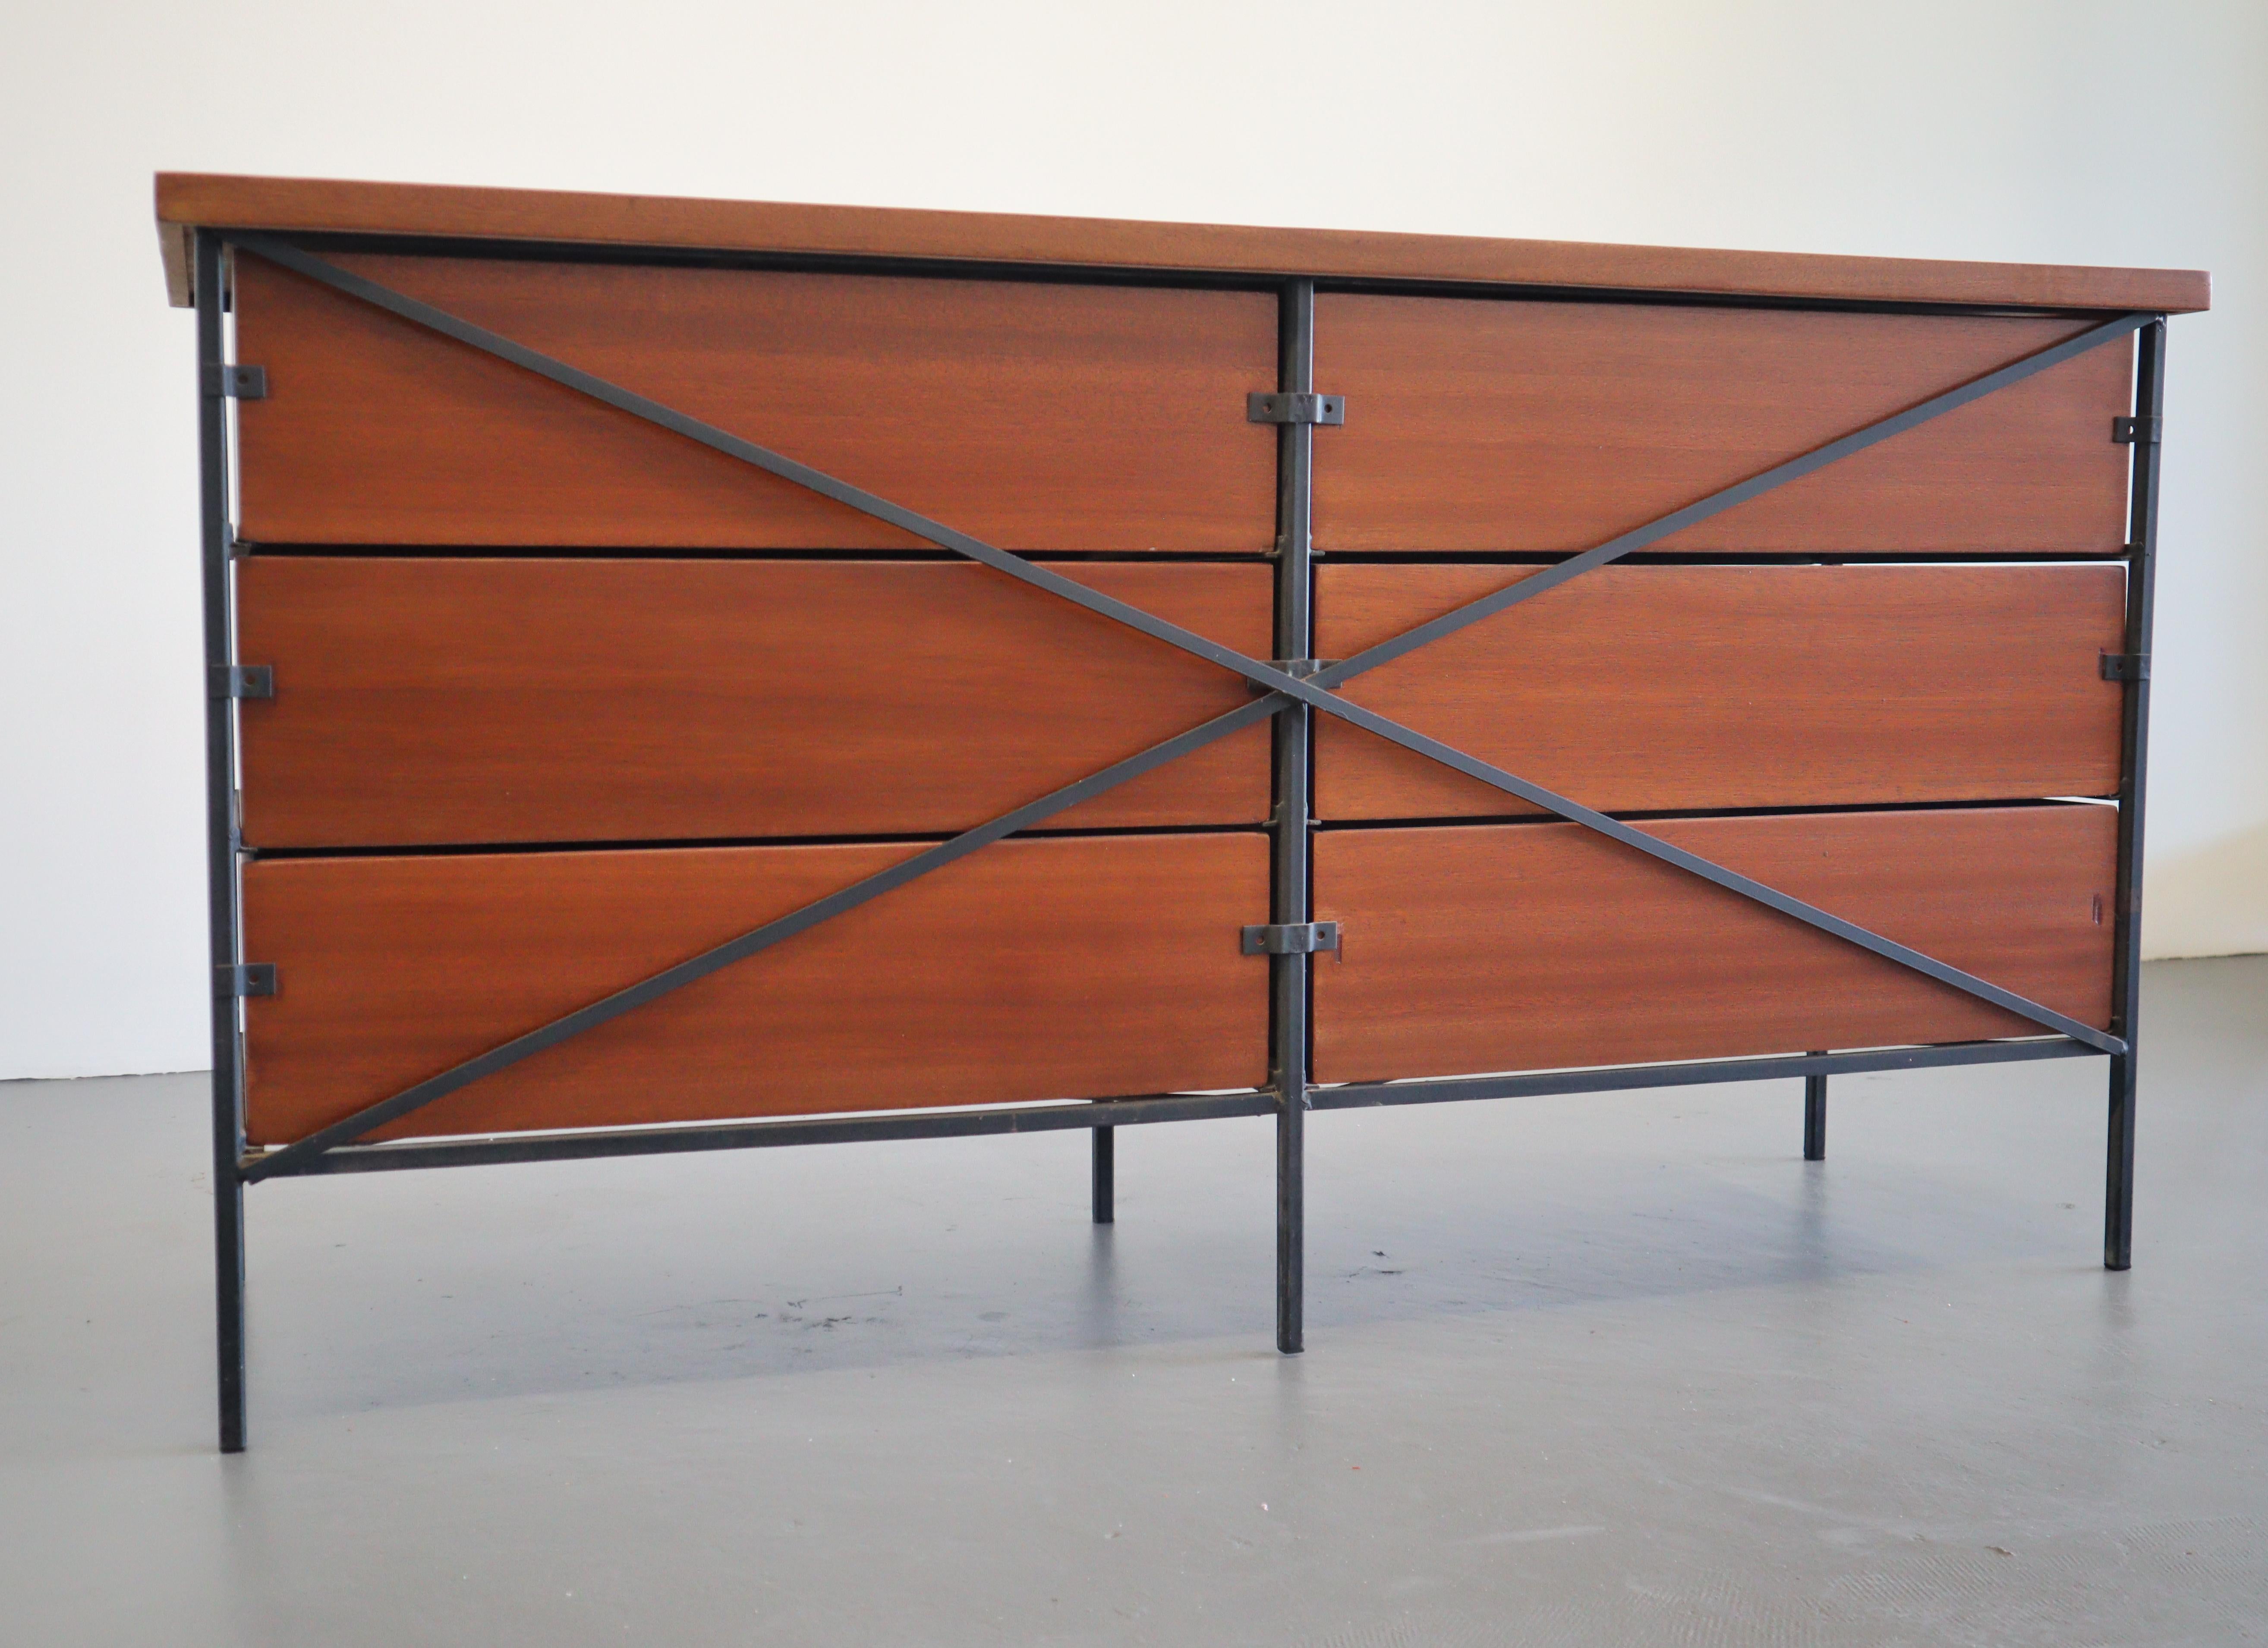 Classic Mid-Century Modern design that is California cool and timeless. A distinguished piece that is unique with its steel frame accented with chrome hardware. This mahogany 6 drawer dresser was designed in California circa 1950's.